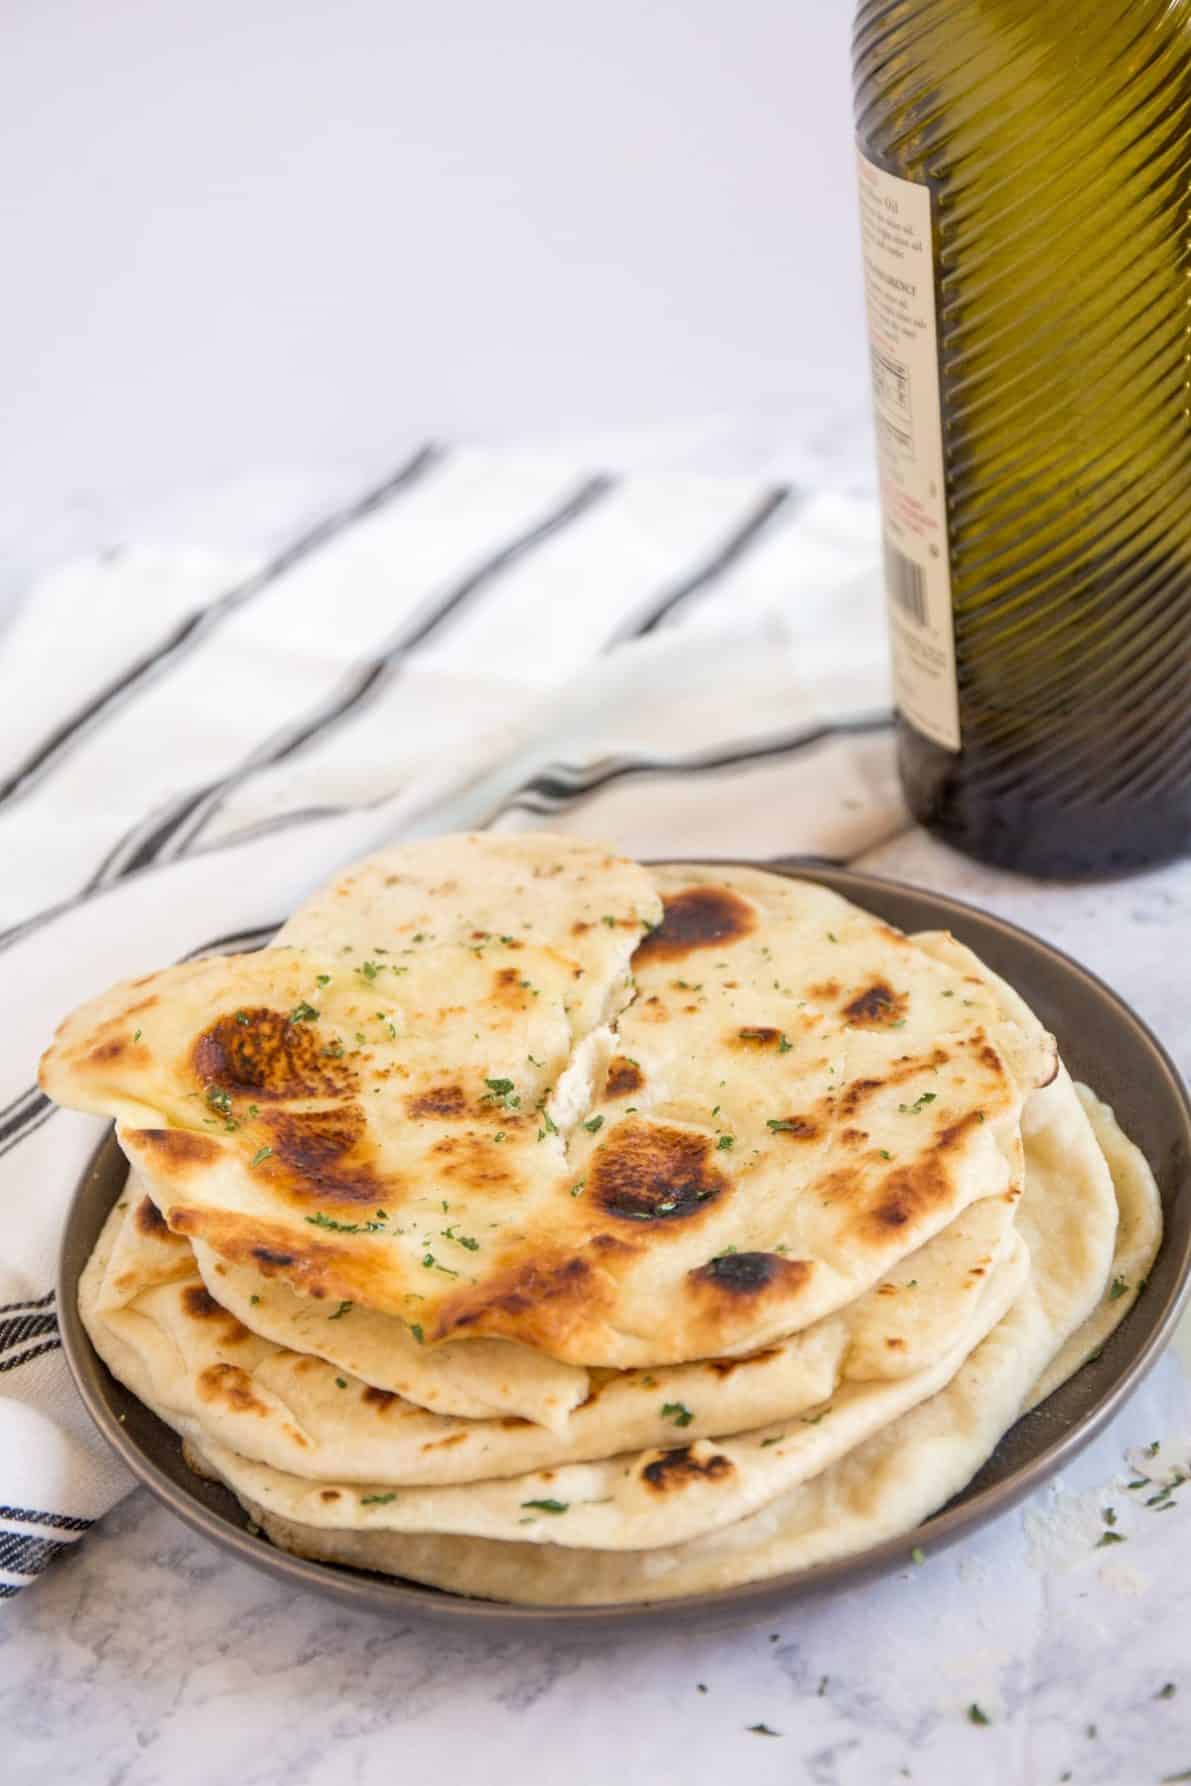 Pita bread on a plate next to a bottle of olive oil.